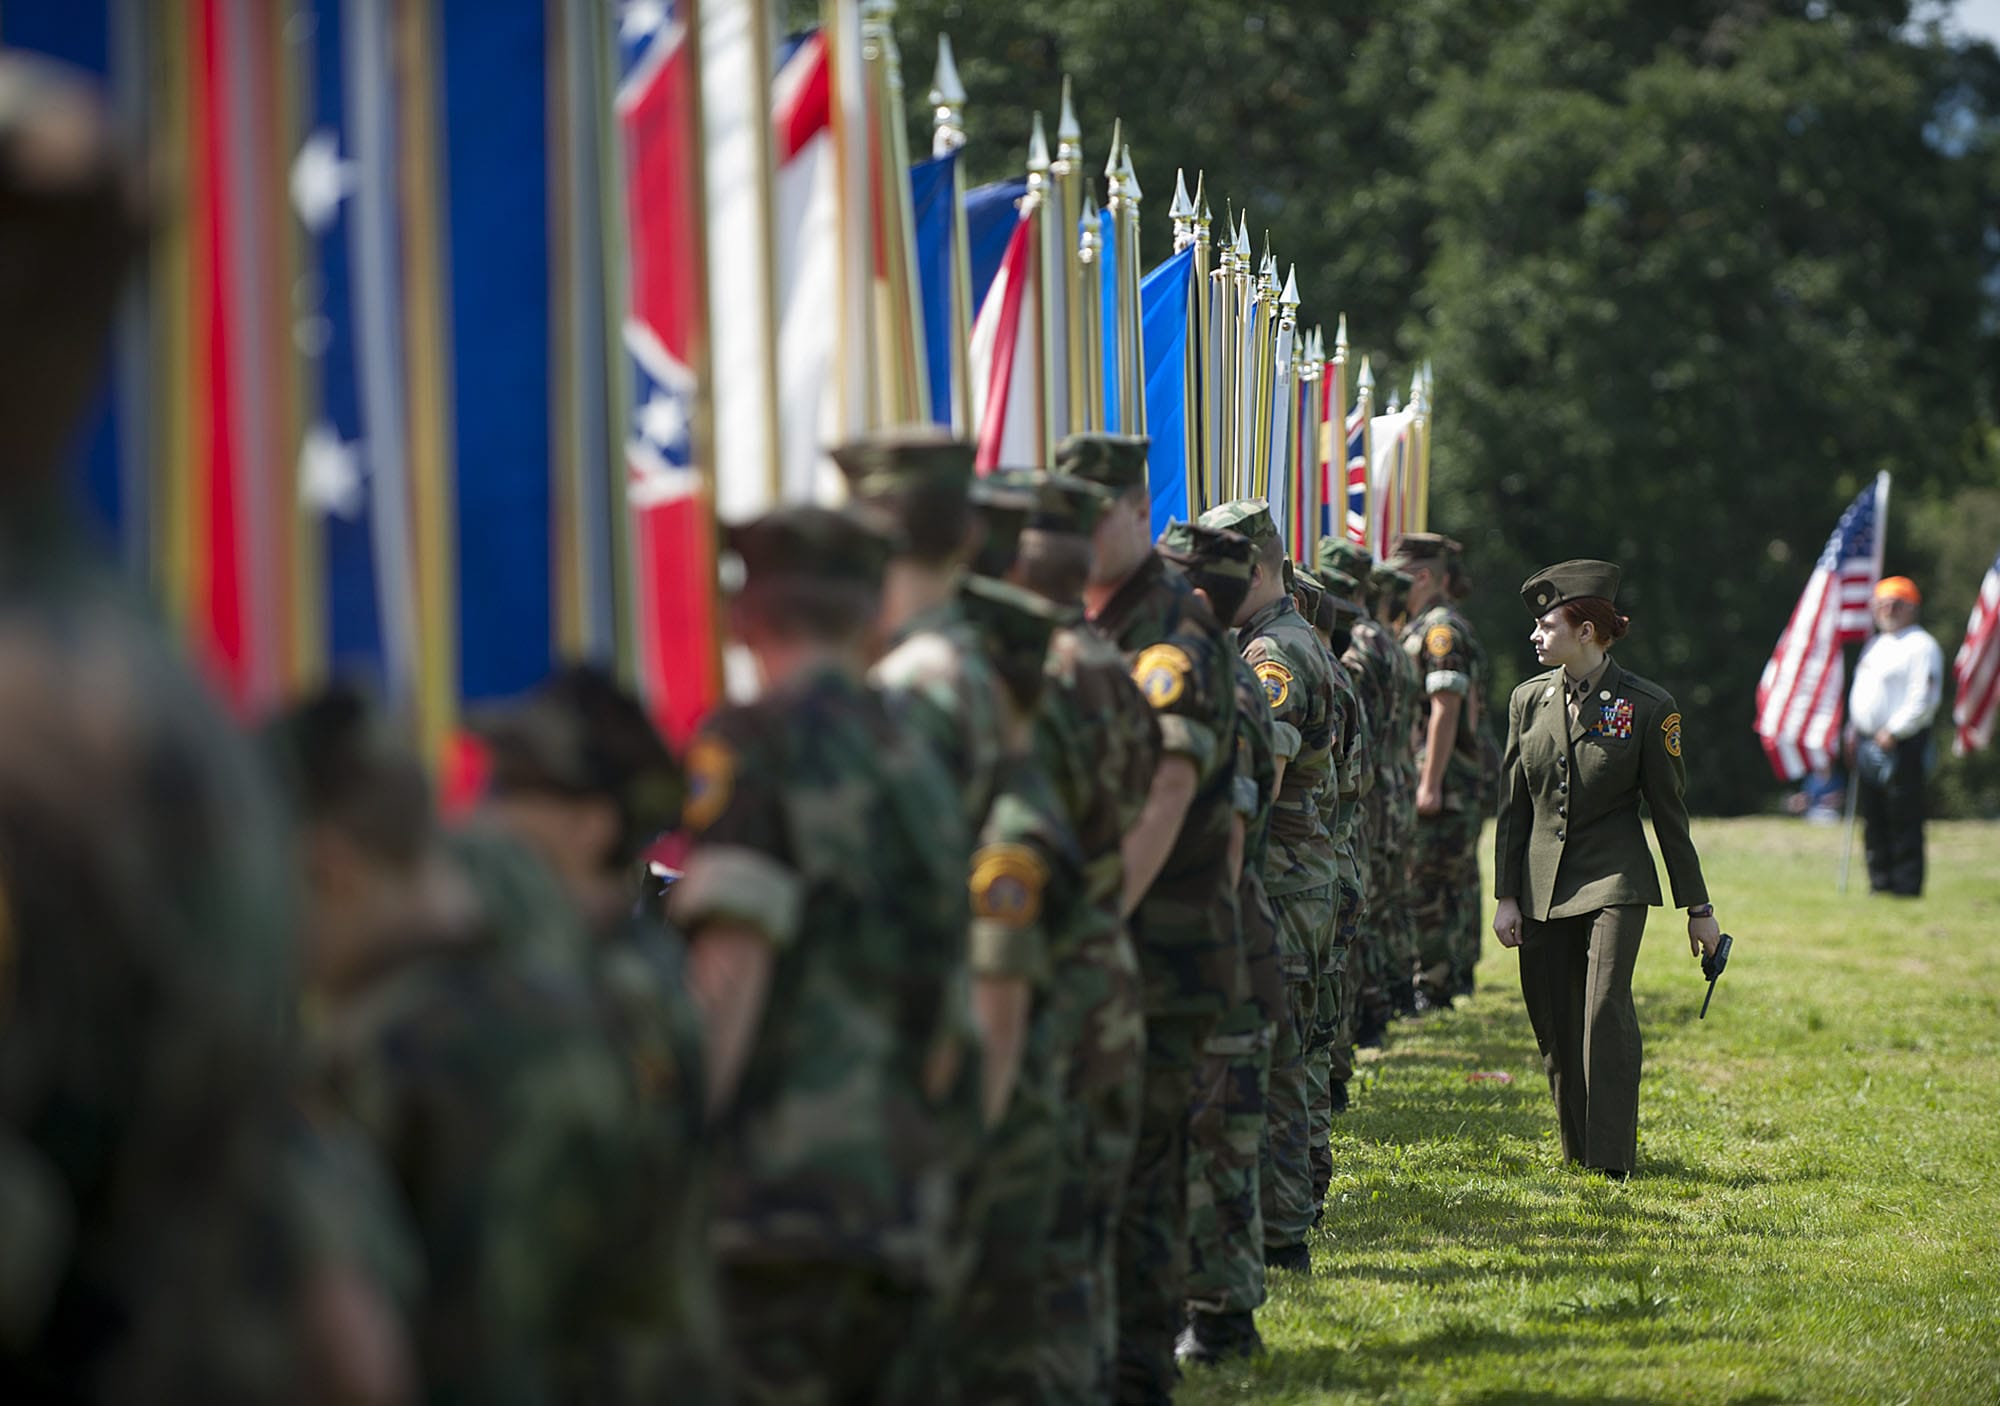 Emily Brinton, 16, of the Lewis &amp; Clark Young Marines walks past the flags of each state before the start of the Memorial Day service Monday morning at Fort Vancouver National Historic Site.